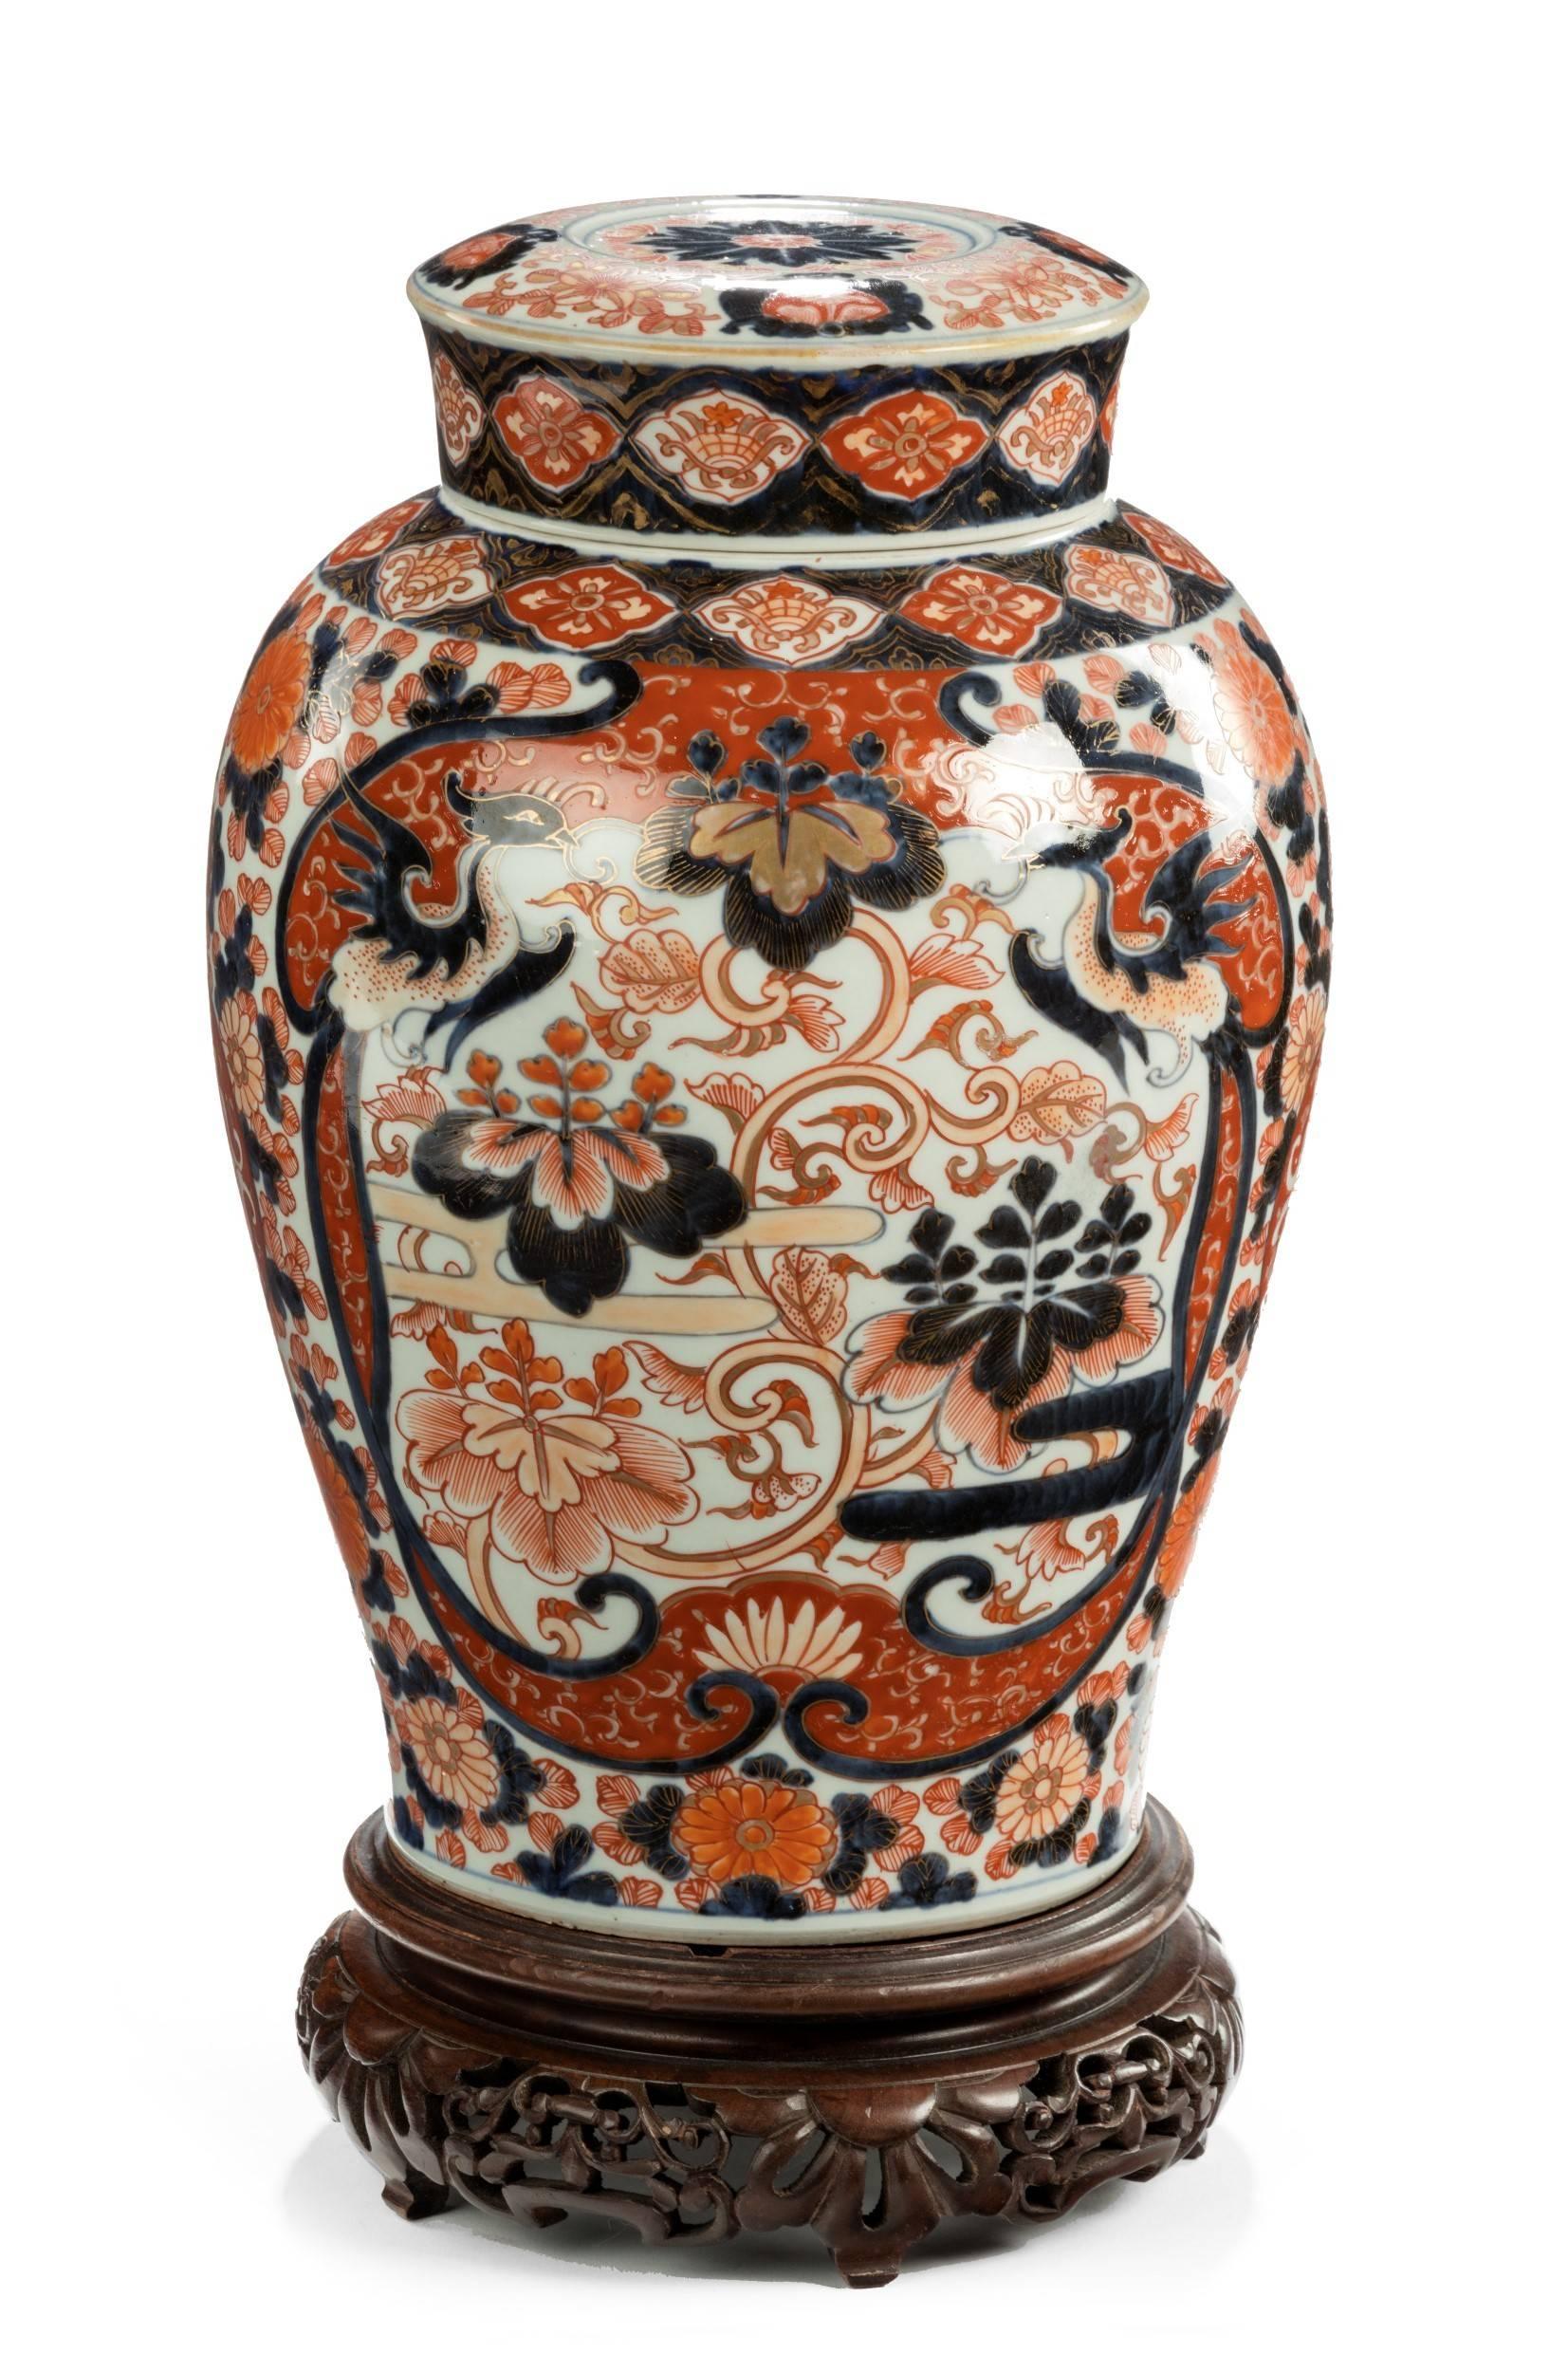 A large single Imari vase with cover. Painted in a typical palette iron-red, under glaze blue and gilt decoration with winged phoenix. A/f chip on lid. Hardwood stand not included.